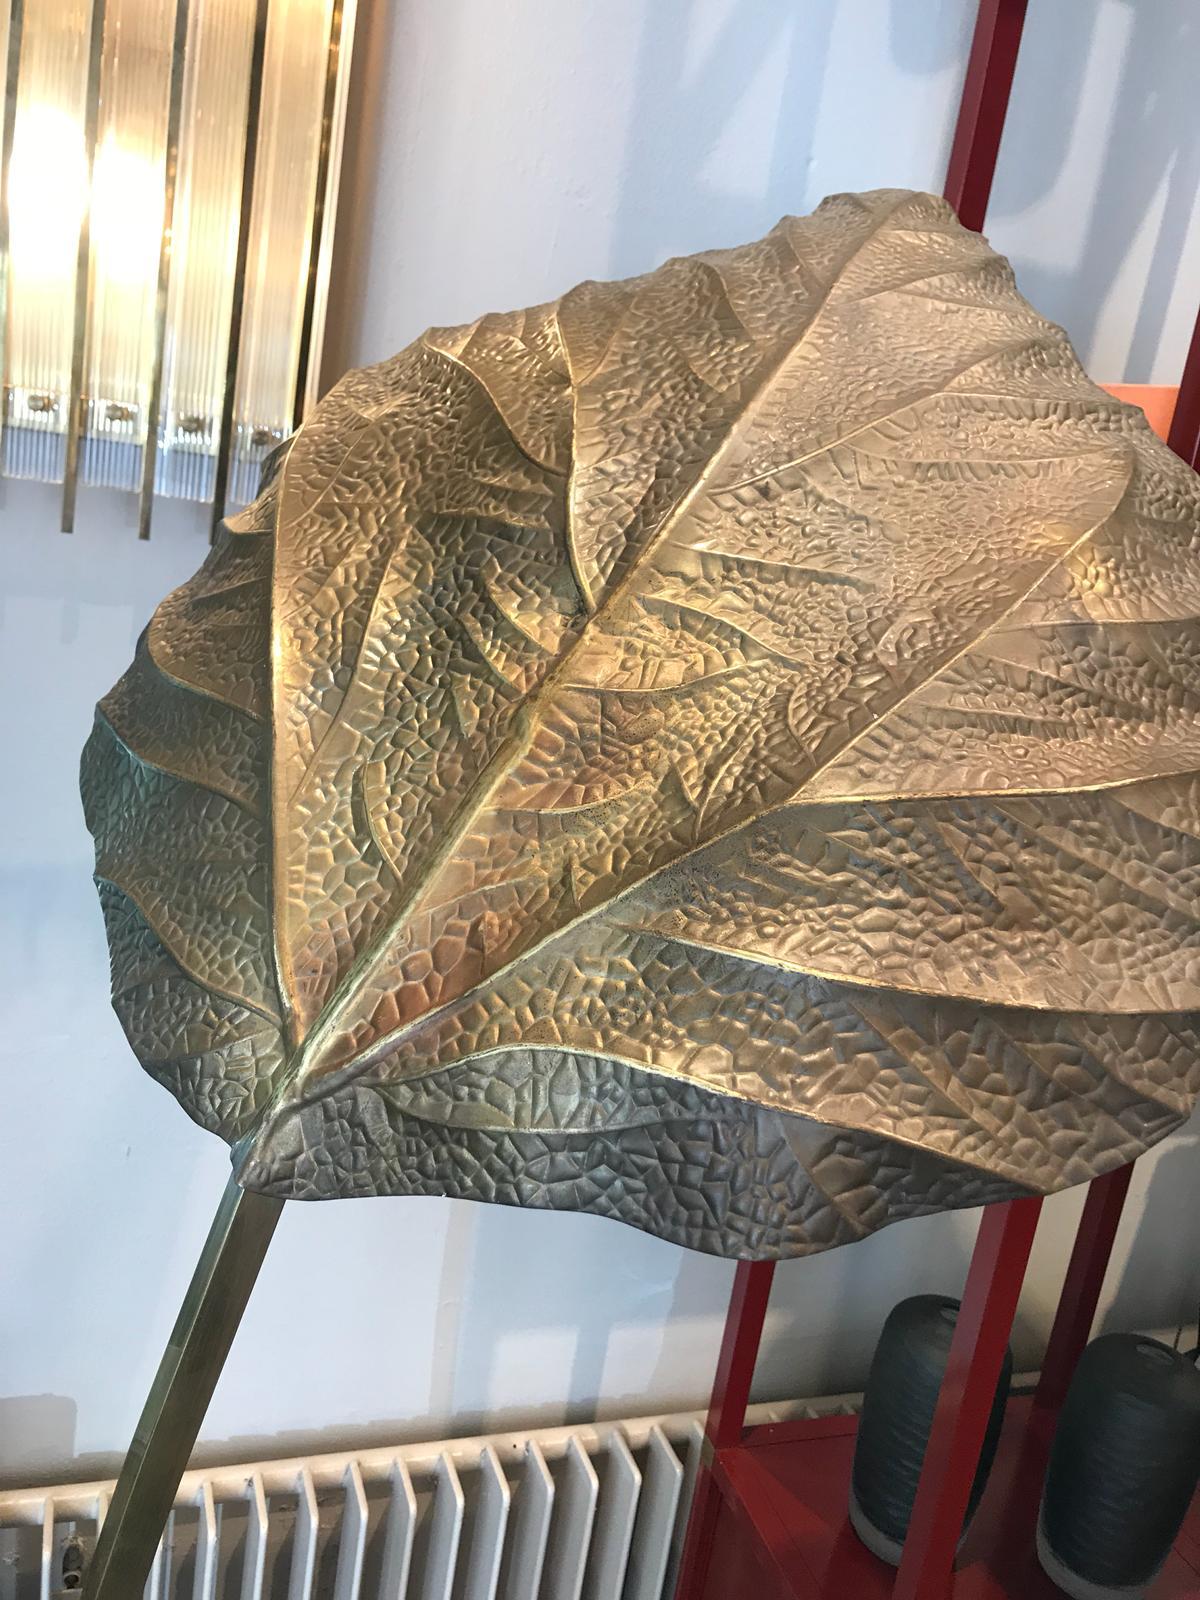 One of the most famous works of Tommaso Barbi, the leaves lamps.
A leaf, made in Italy in the 1970, brass

Unrestored original piece shows traces of oxidation, but this is its beauty!
If you prefer to make it look new, just polish it with